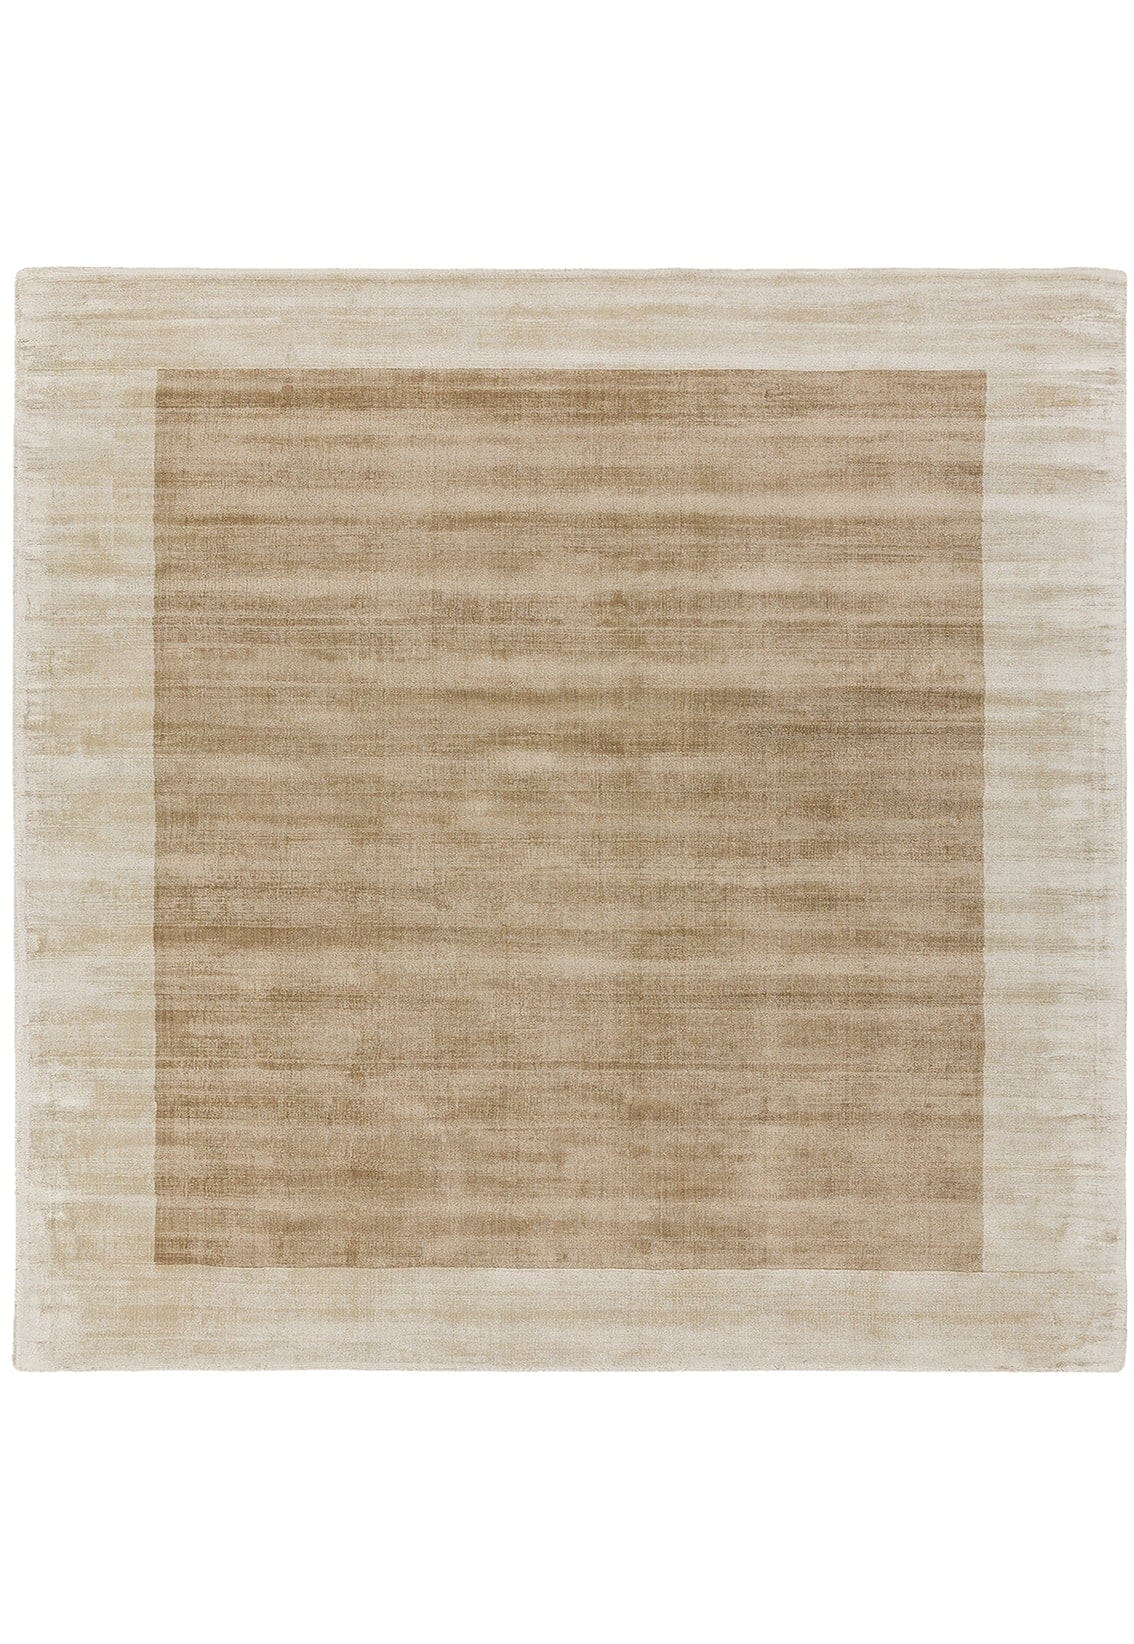  Asiatic Carpets-Asiatic Carpets Blade Hand Woven Rug Putty Champagne - 200 x 200cm-Beige, Natural 685 